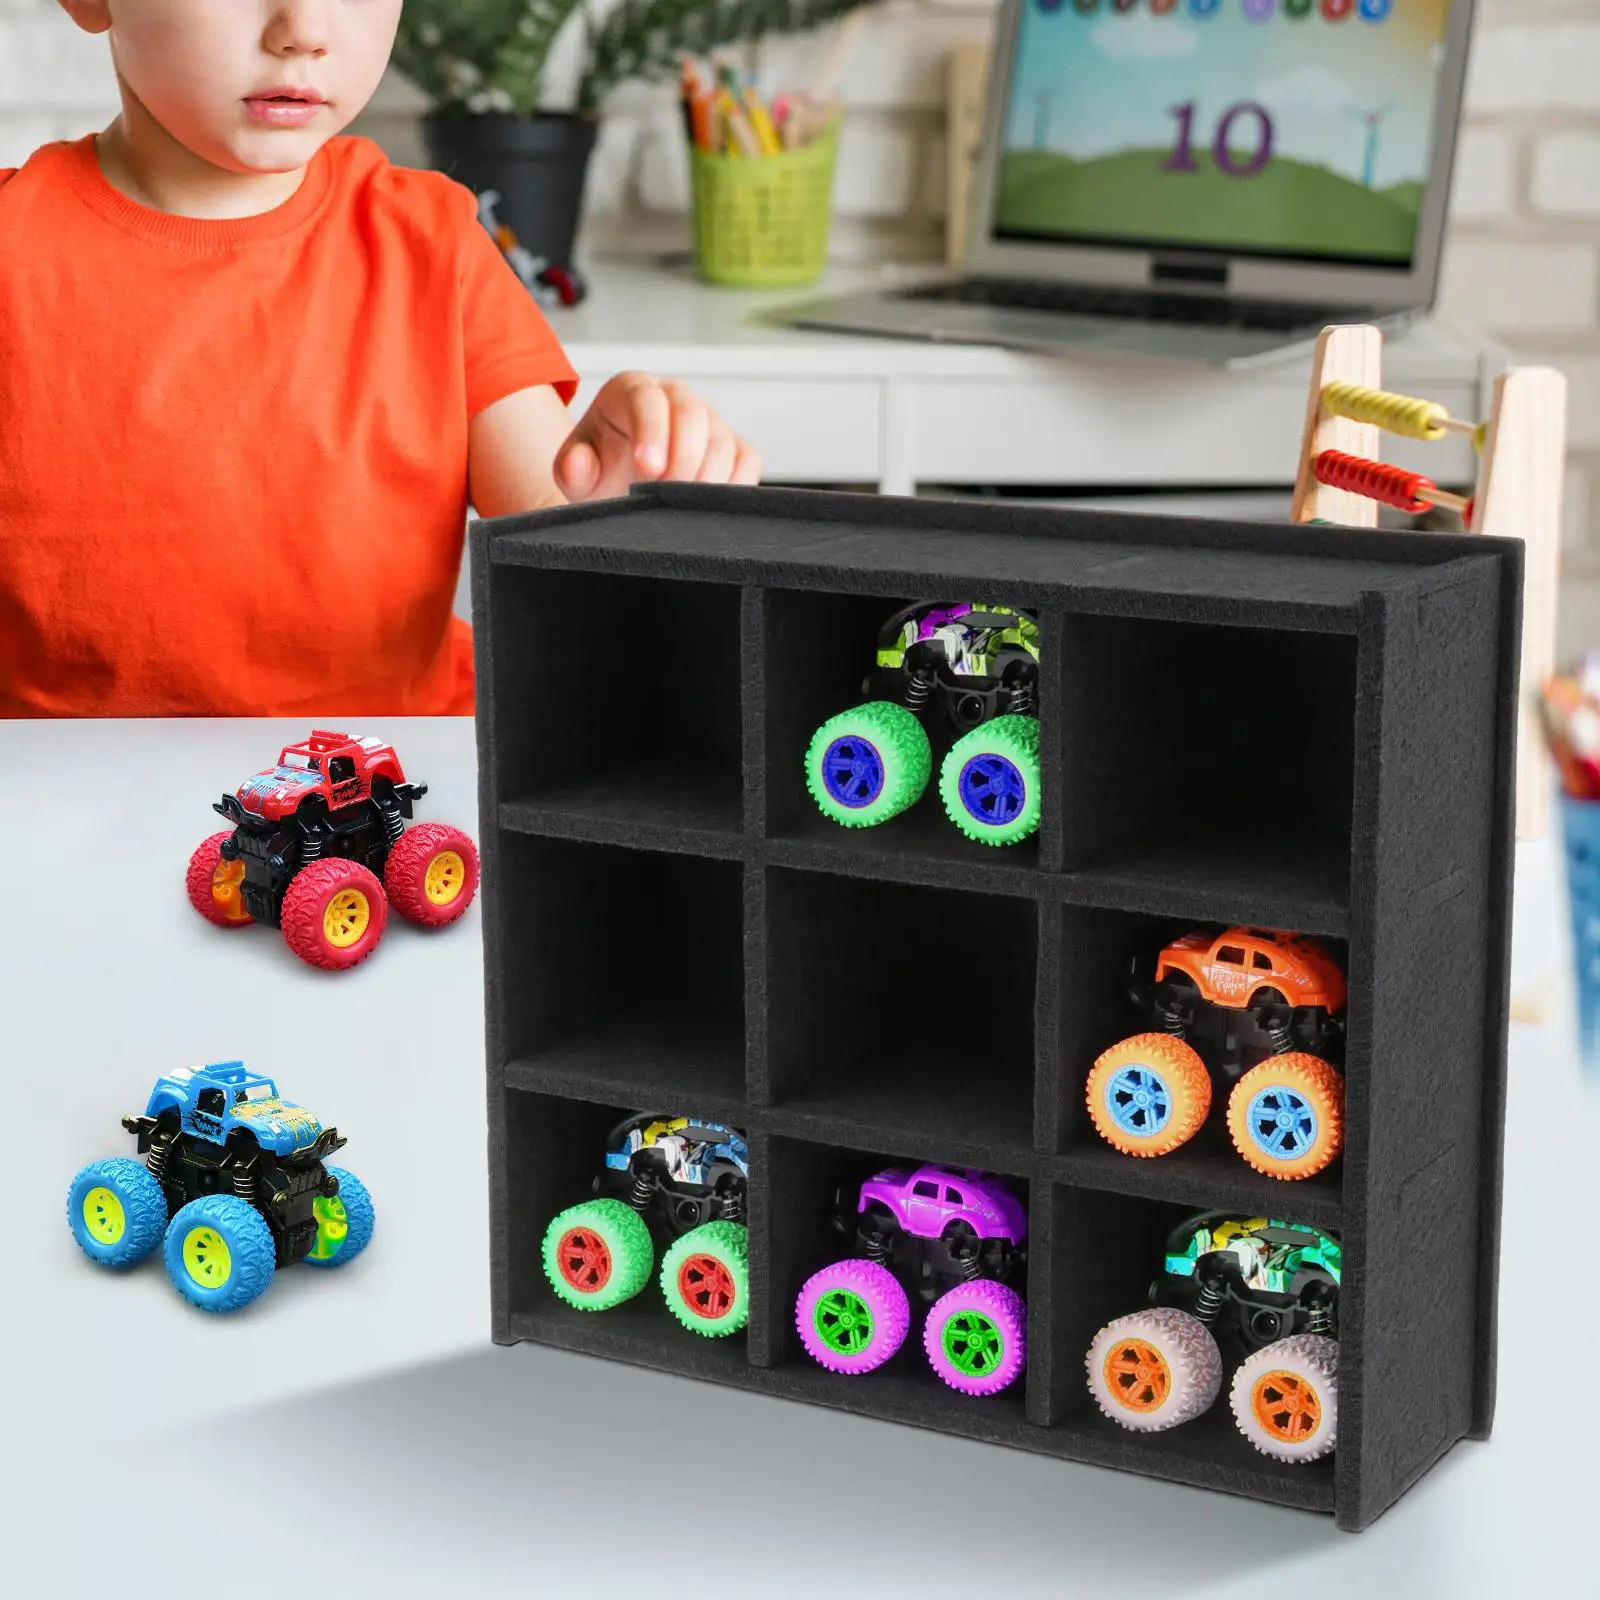 Toy Trucks Door Wall Mounted Storage Case Felt Material for Displaying